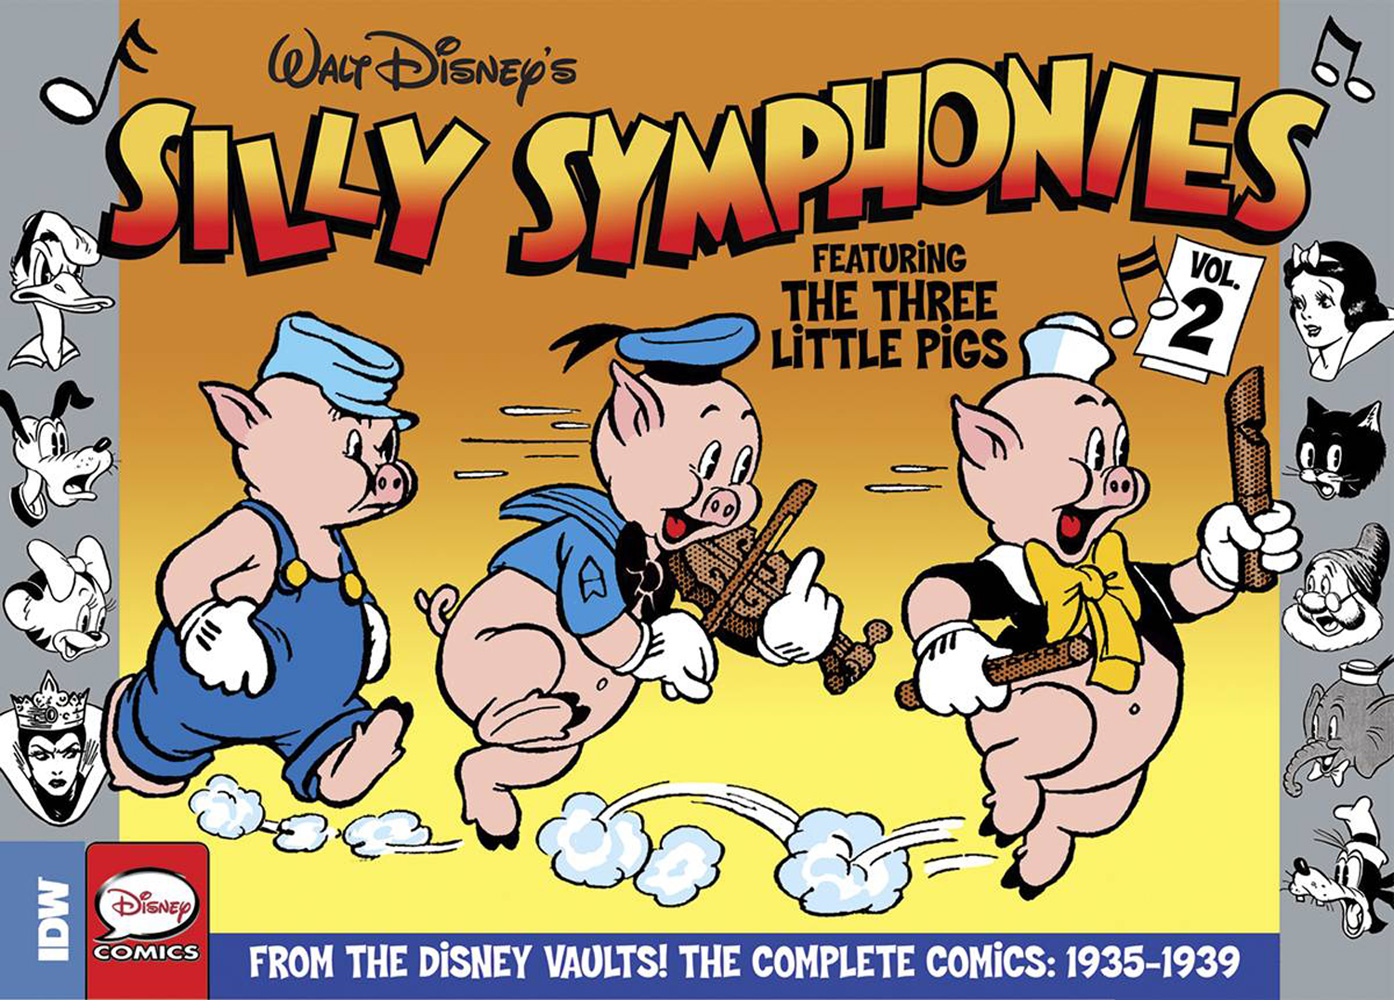 Silly Symphonies: The Complete Comics Vol. 2